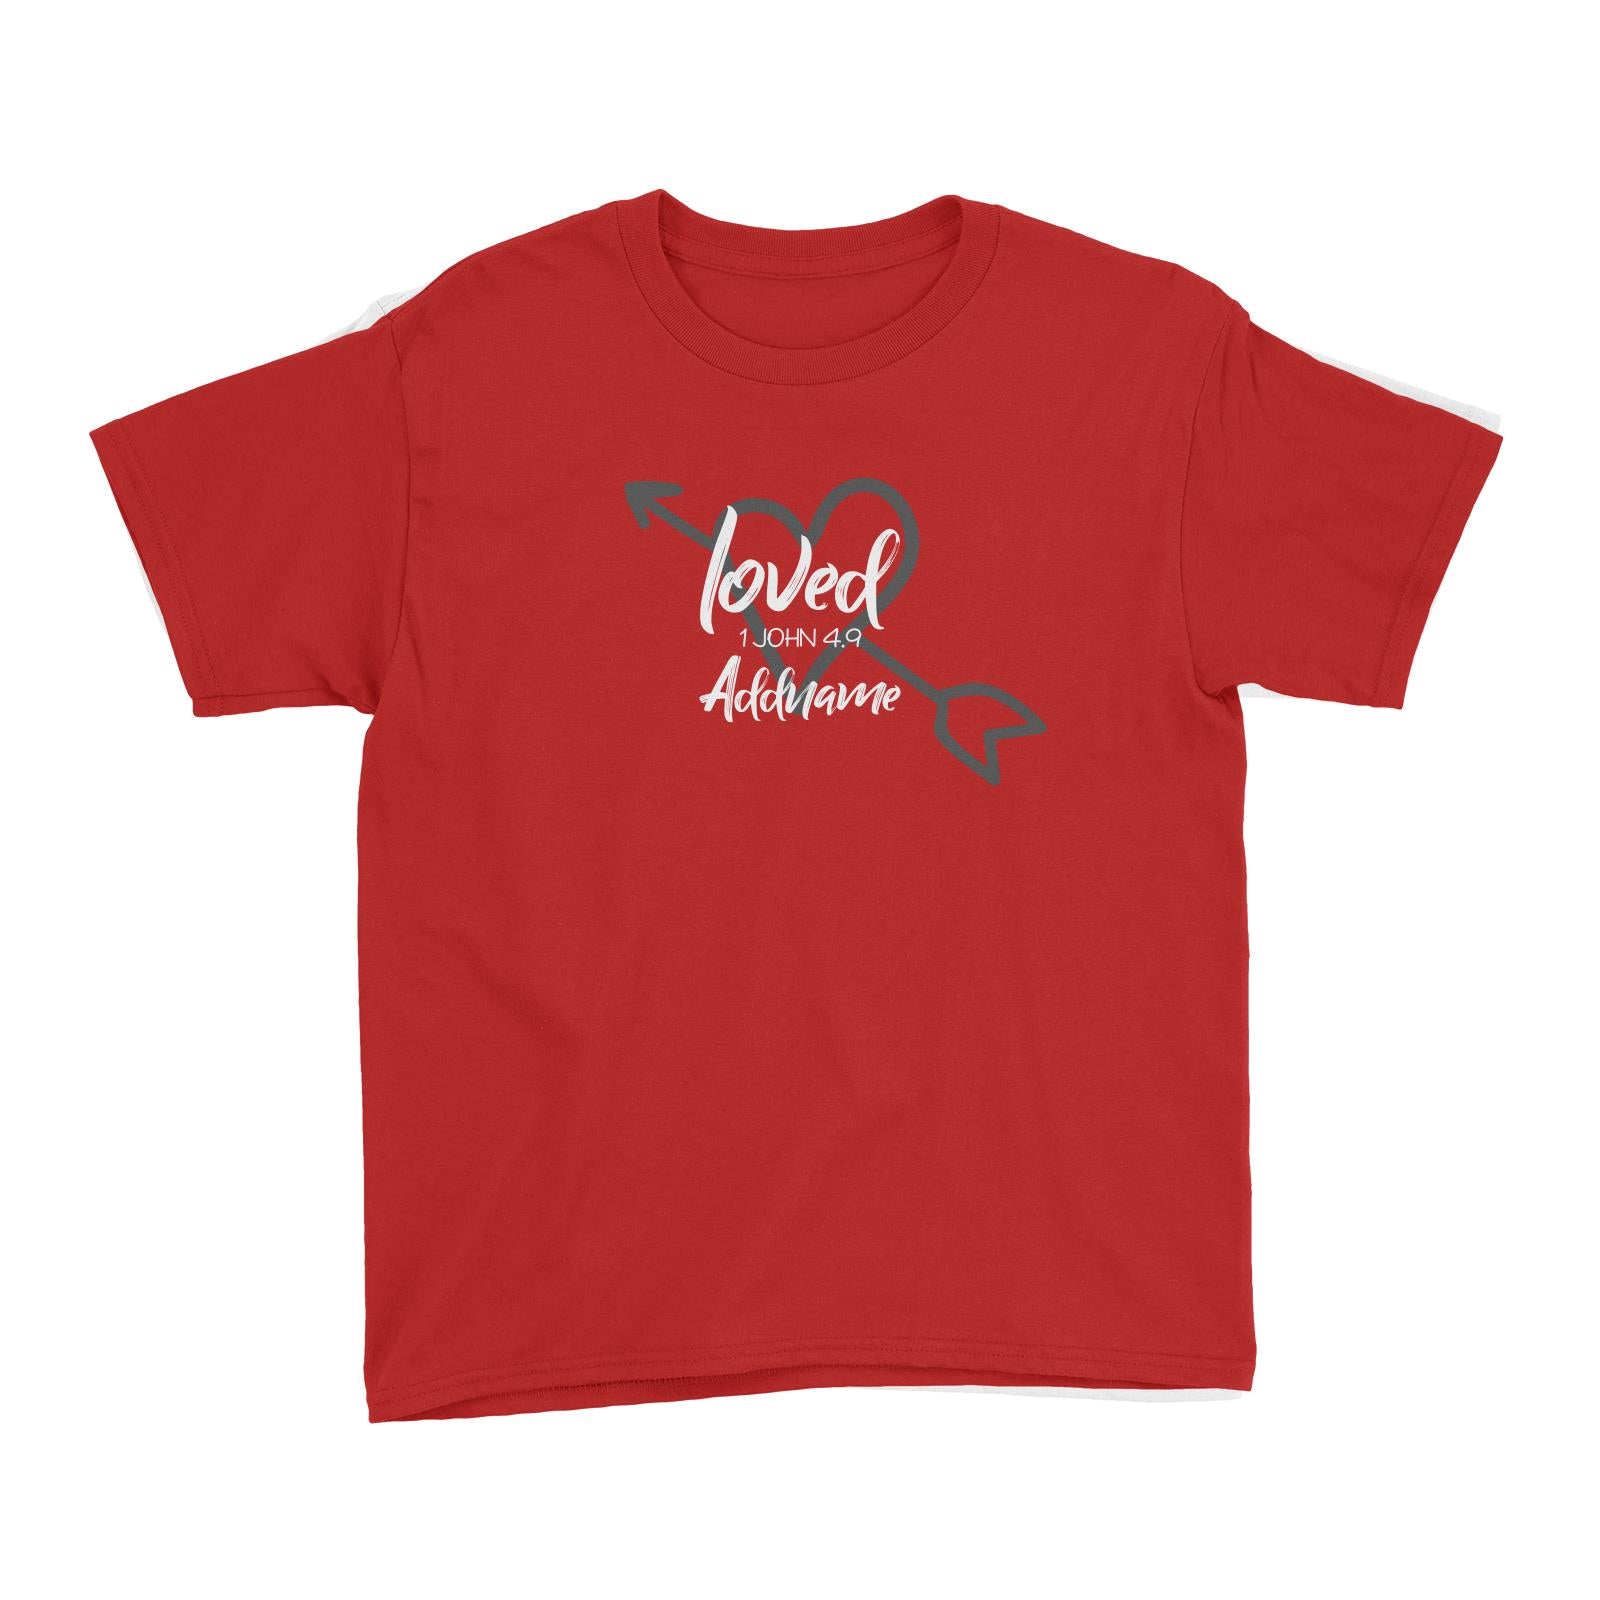 Loved Family Loved With Heart And Arrow 1 John 4.9 Addname Kid's T-Shirt